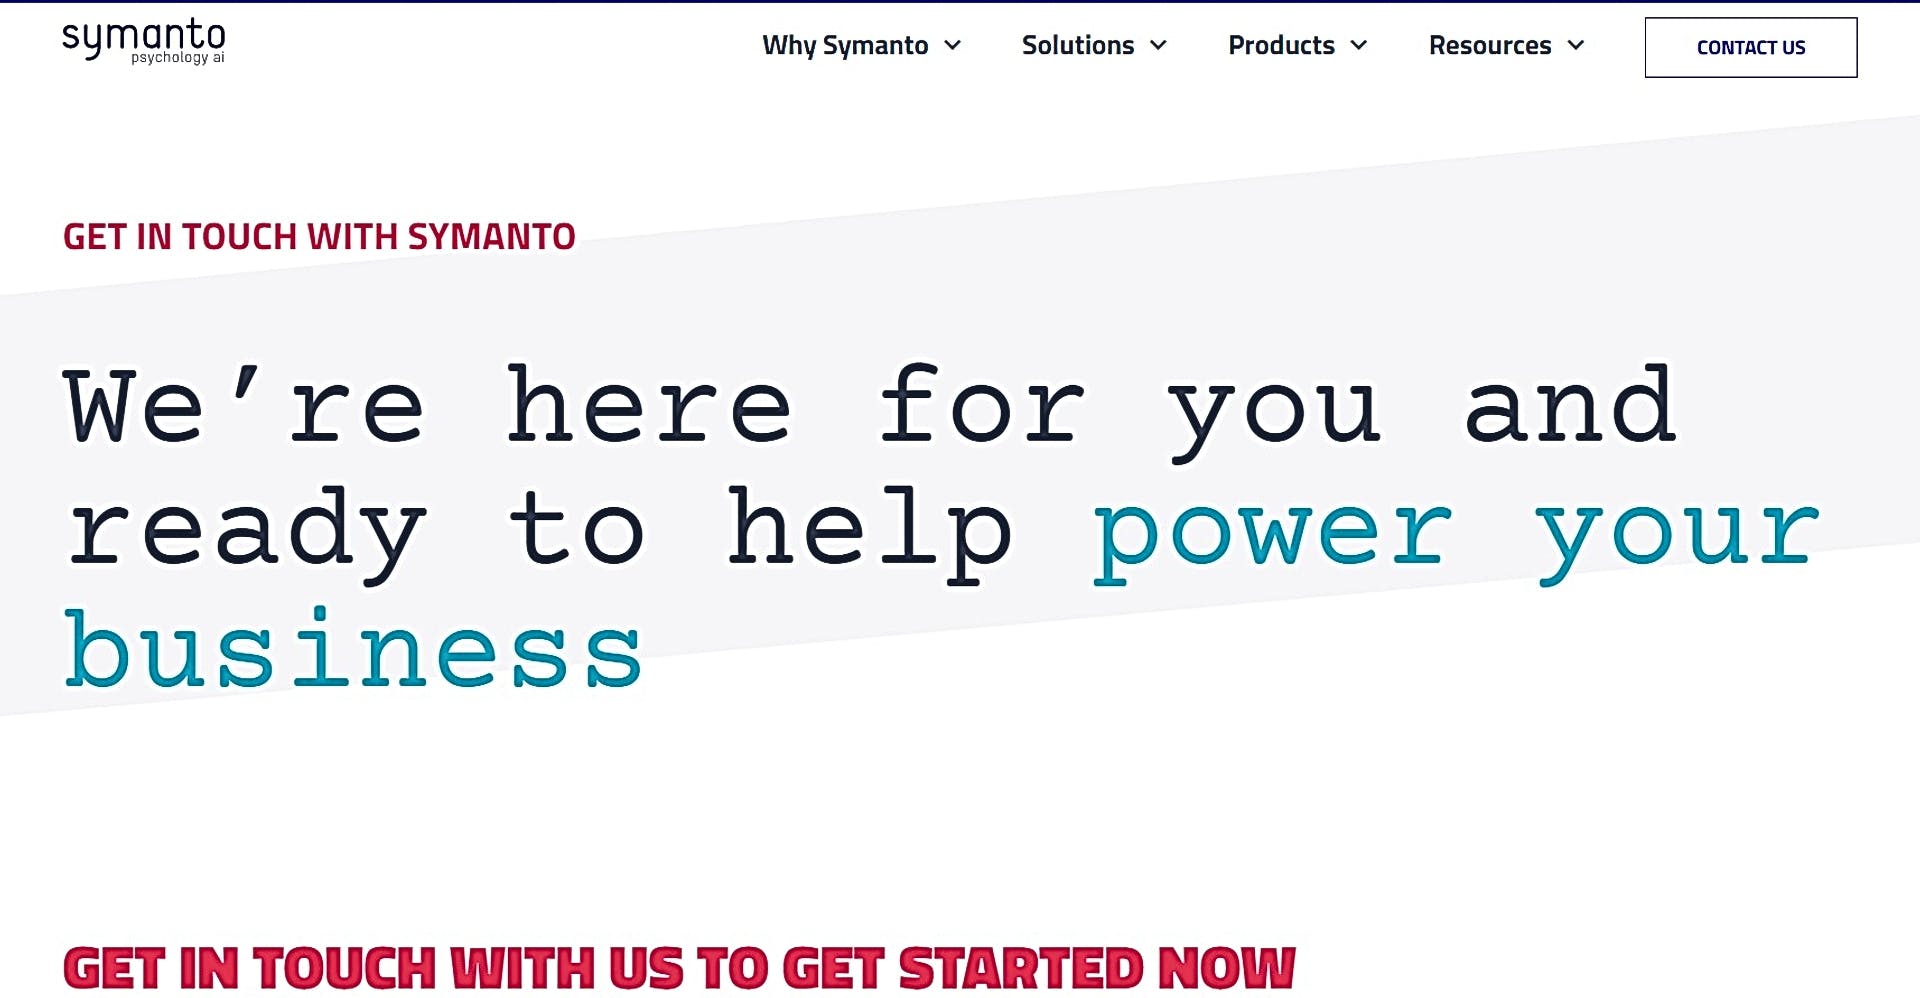 Symanto Text Insights featured